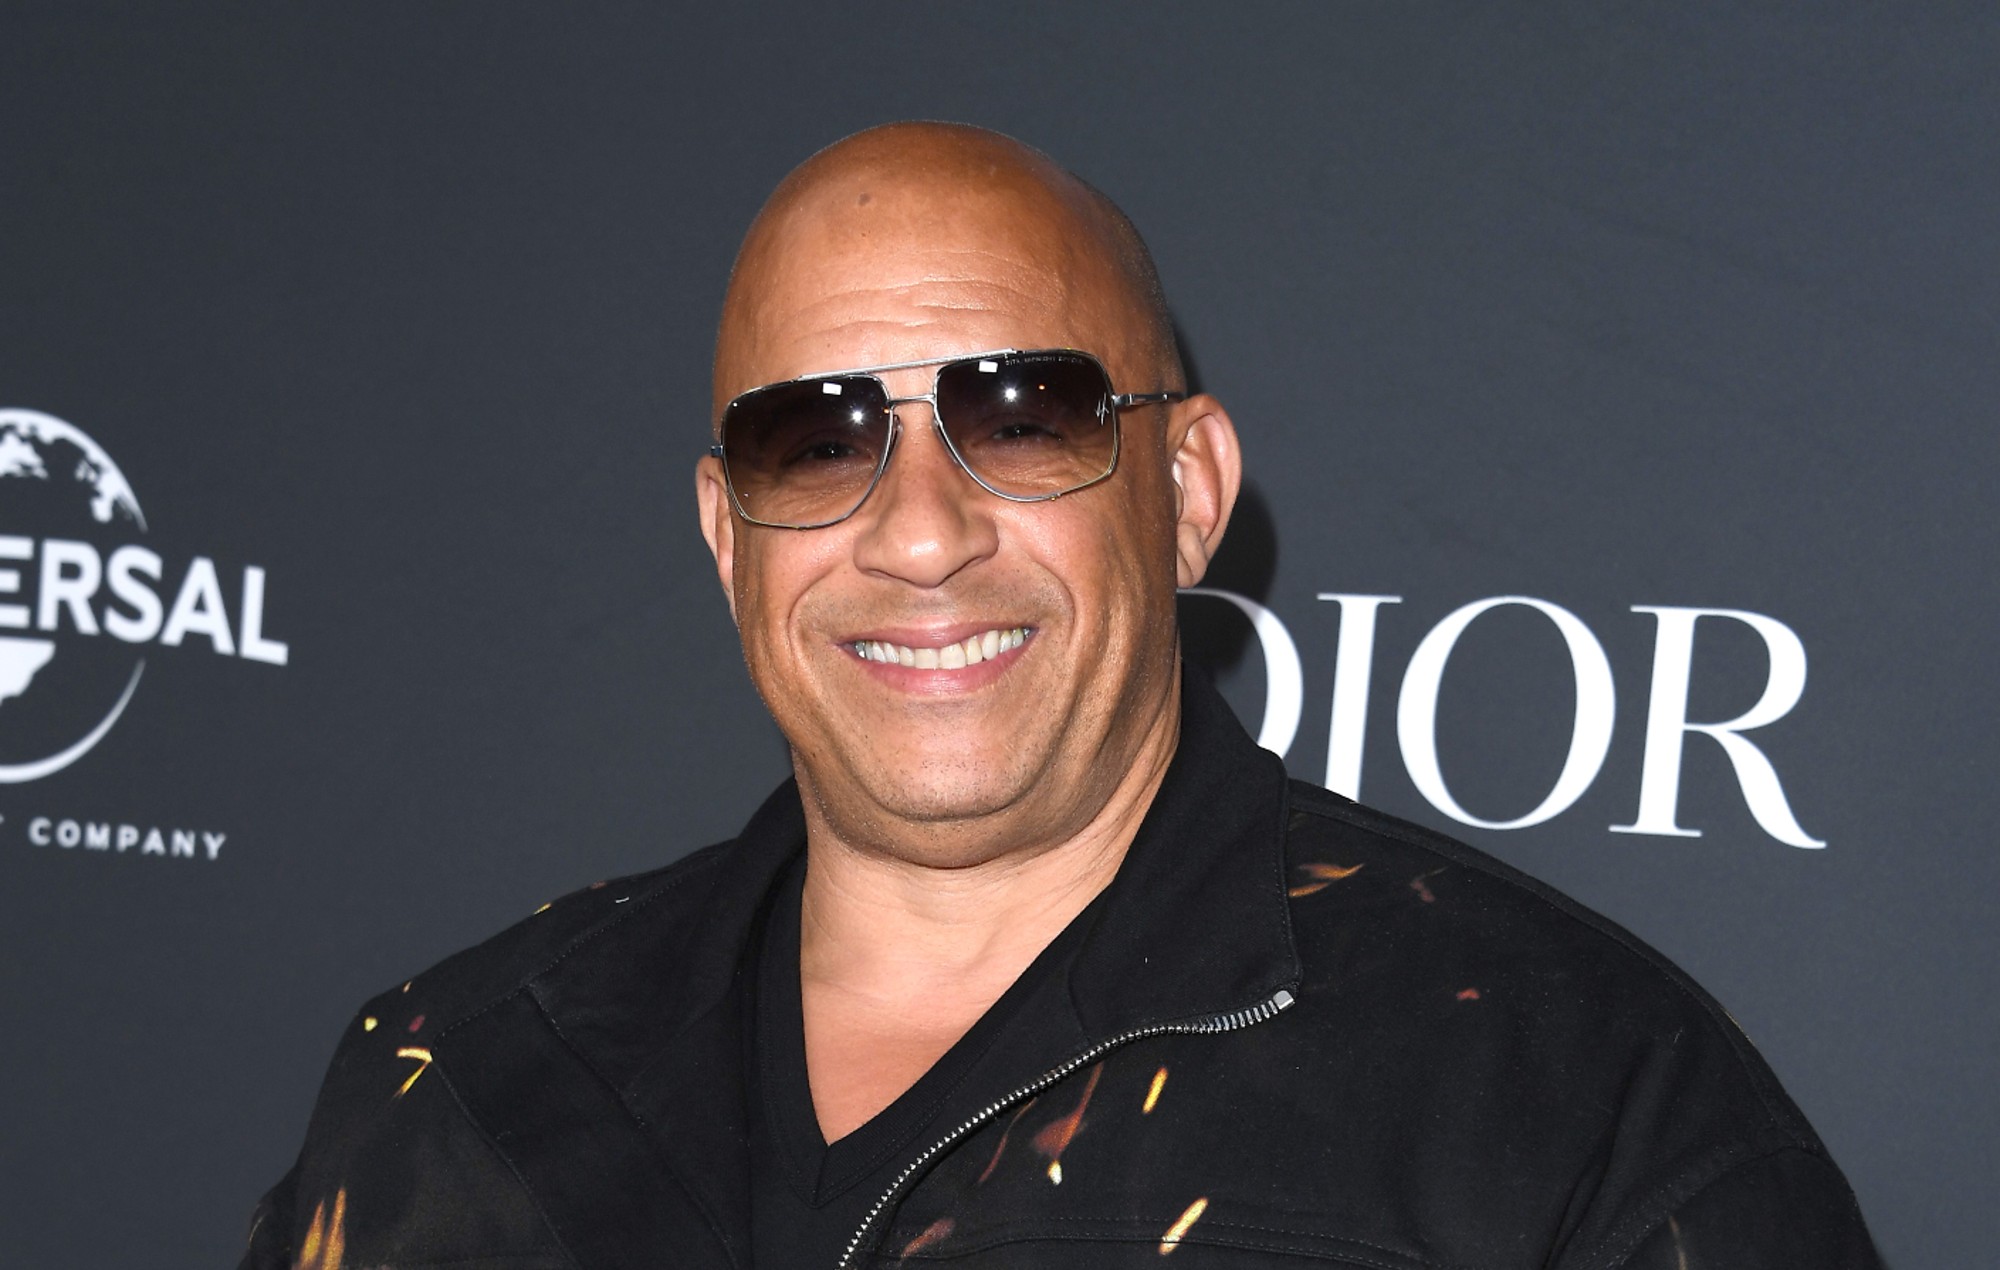 Actor Vin Diesel is entangled with sexual assault allegations after a former assistant comes forward. (Photo: NME)